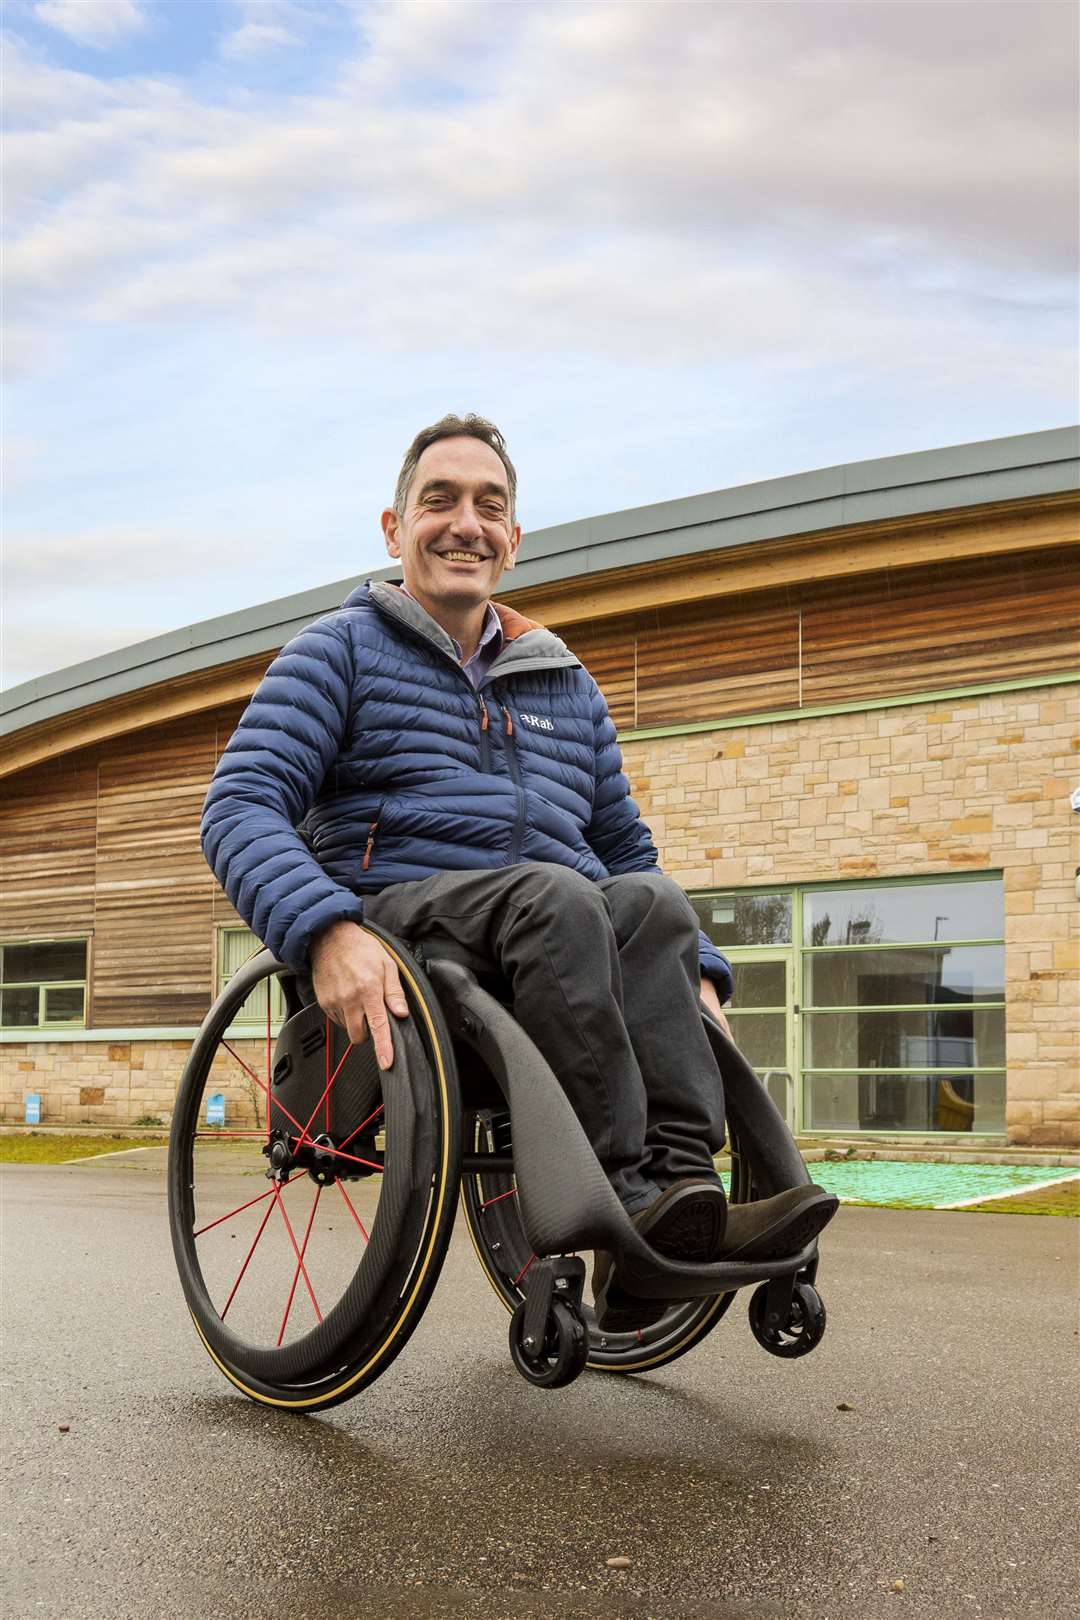 Phoenix Instinct CEO and founder Andrew Slorance in the Phoenix i wheelchair at Forres Enterprise Park. Image by: Malcolm McCurrach